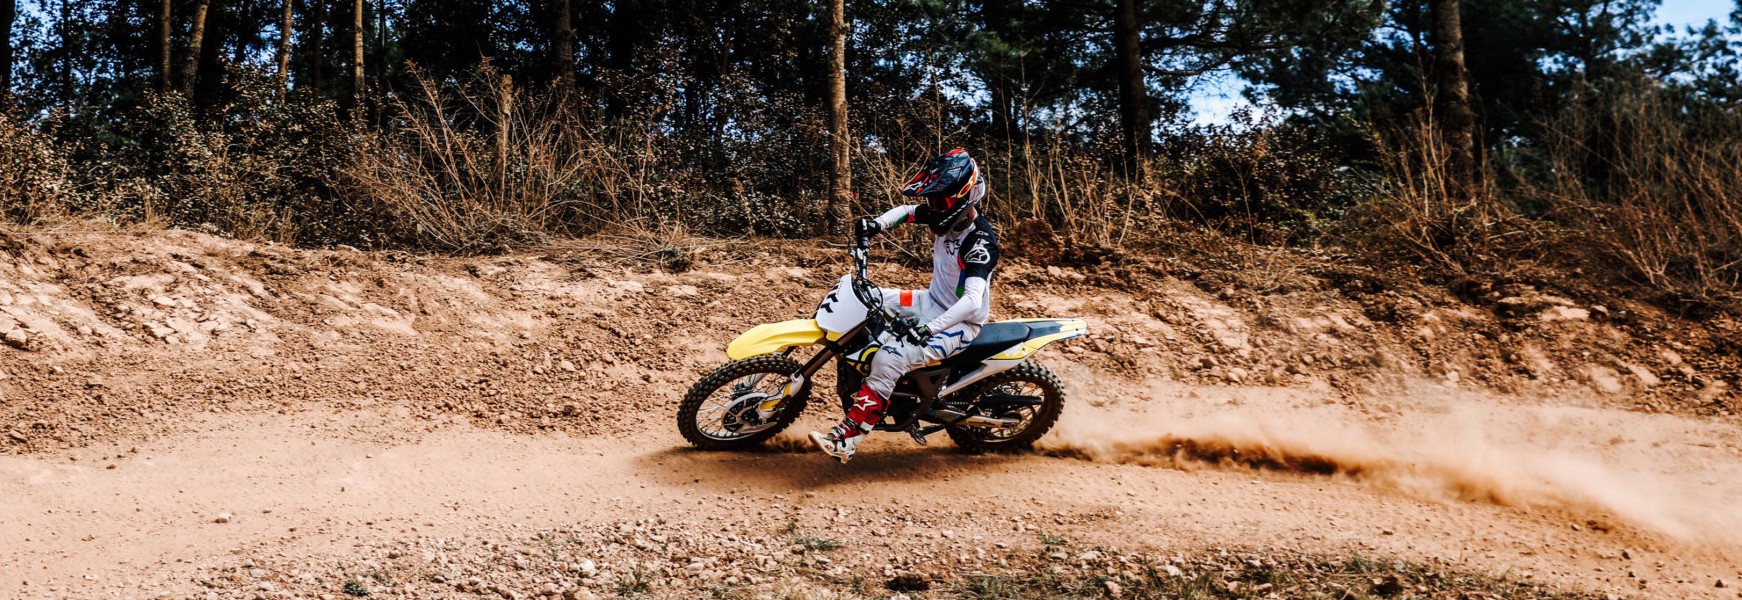 motorbike racing rider competing on yellow sur-ron storm in rough terrain